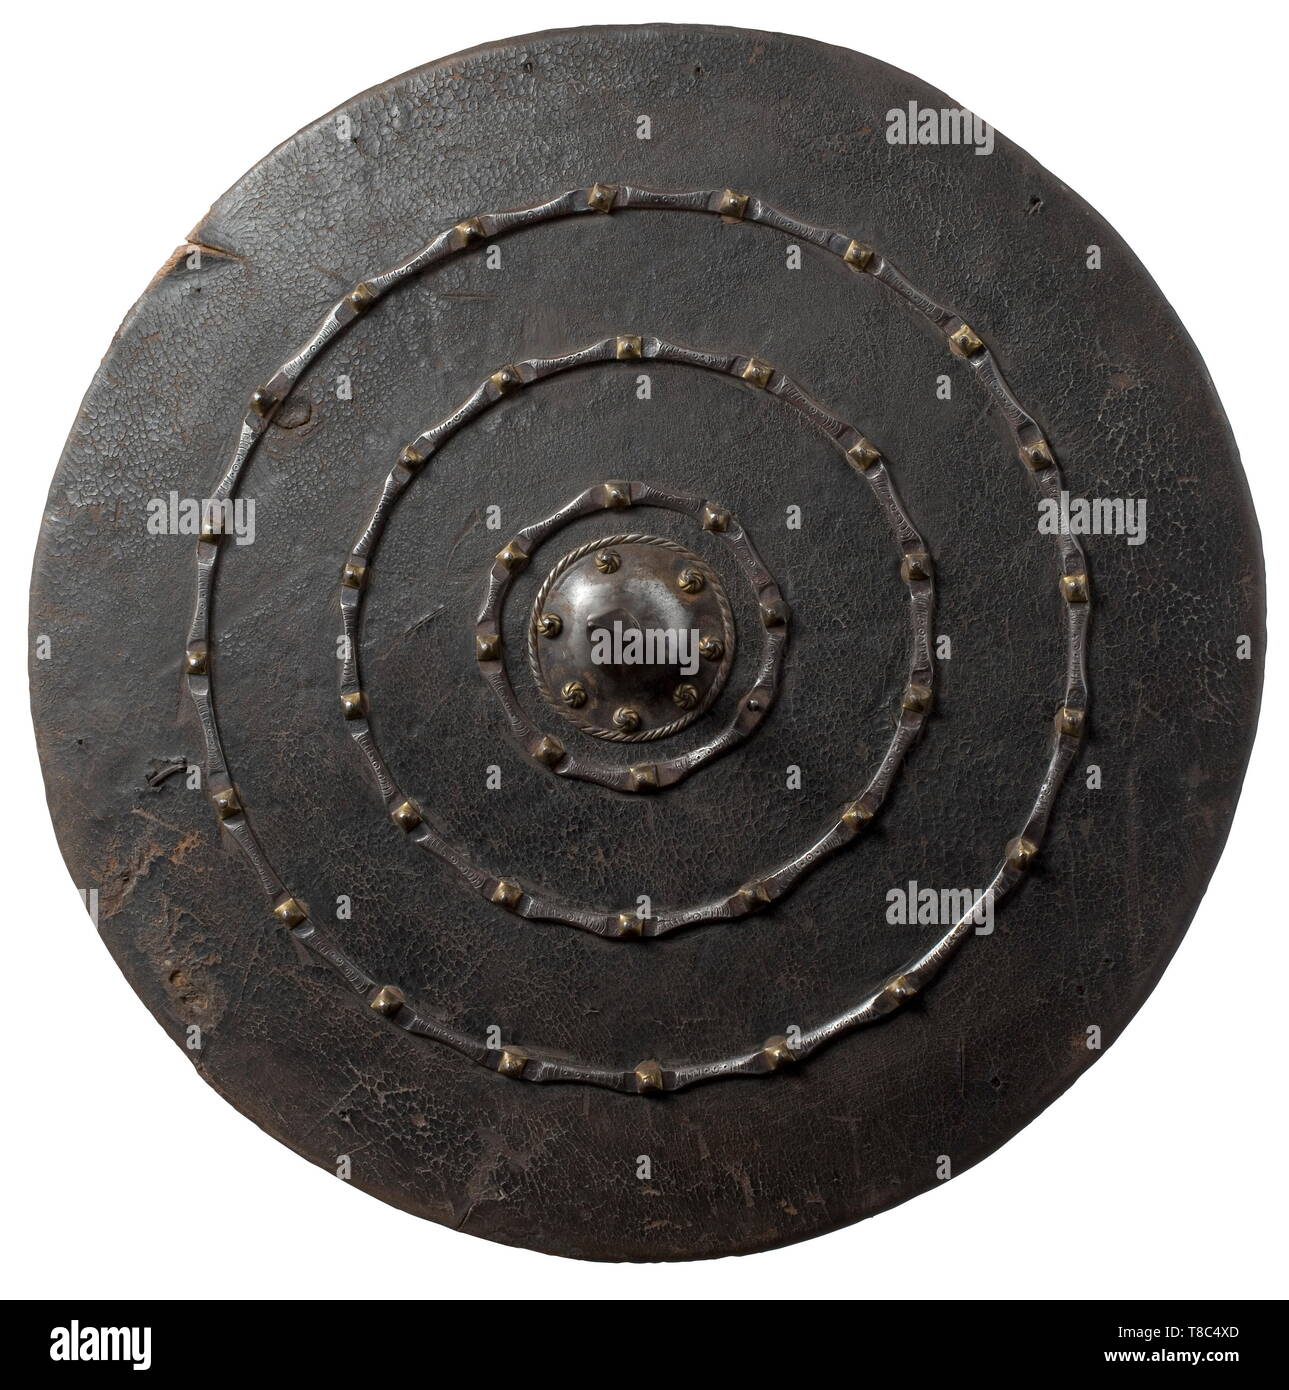 An Italian wooden round shield, 2nd half of 16th century Wooden round shield covered with leather and parchment. Three nailed iron rings and central, cut spike of quadrangular section at front, the nails with decorative, spirally engraved and pyramid-shaped brass washers. Remains of grip at back. Signs of age and use. Diameter 50.5 cm. historic, historical, defensive arms, weapons, arms, weapon, arm, fighting device, object, objects, stills, clipping, clippings, cut out, cut-out, cut-outs, utensil, piece of equipment, utensils, Additional-Rights-Clearance-Info-Not-Available Stock Photo